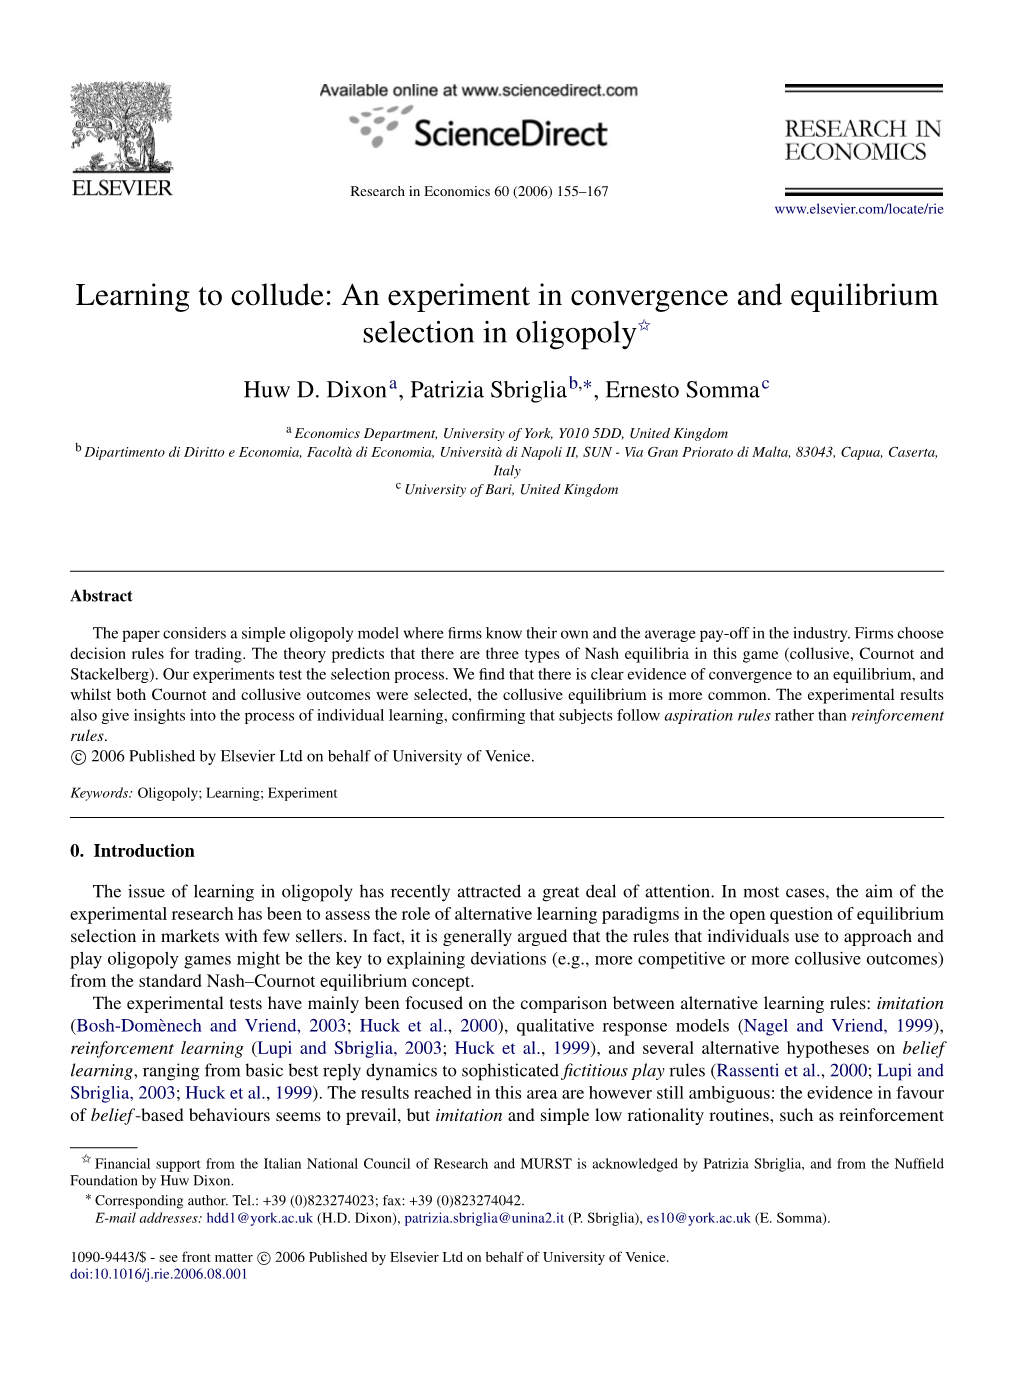 Learning to Collude: an Experiment in Convergence and Equilibrium Selection in Oligopoly$